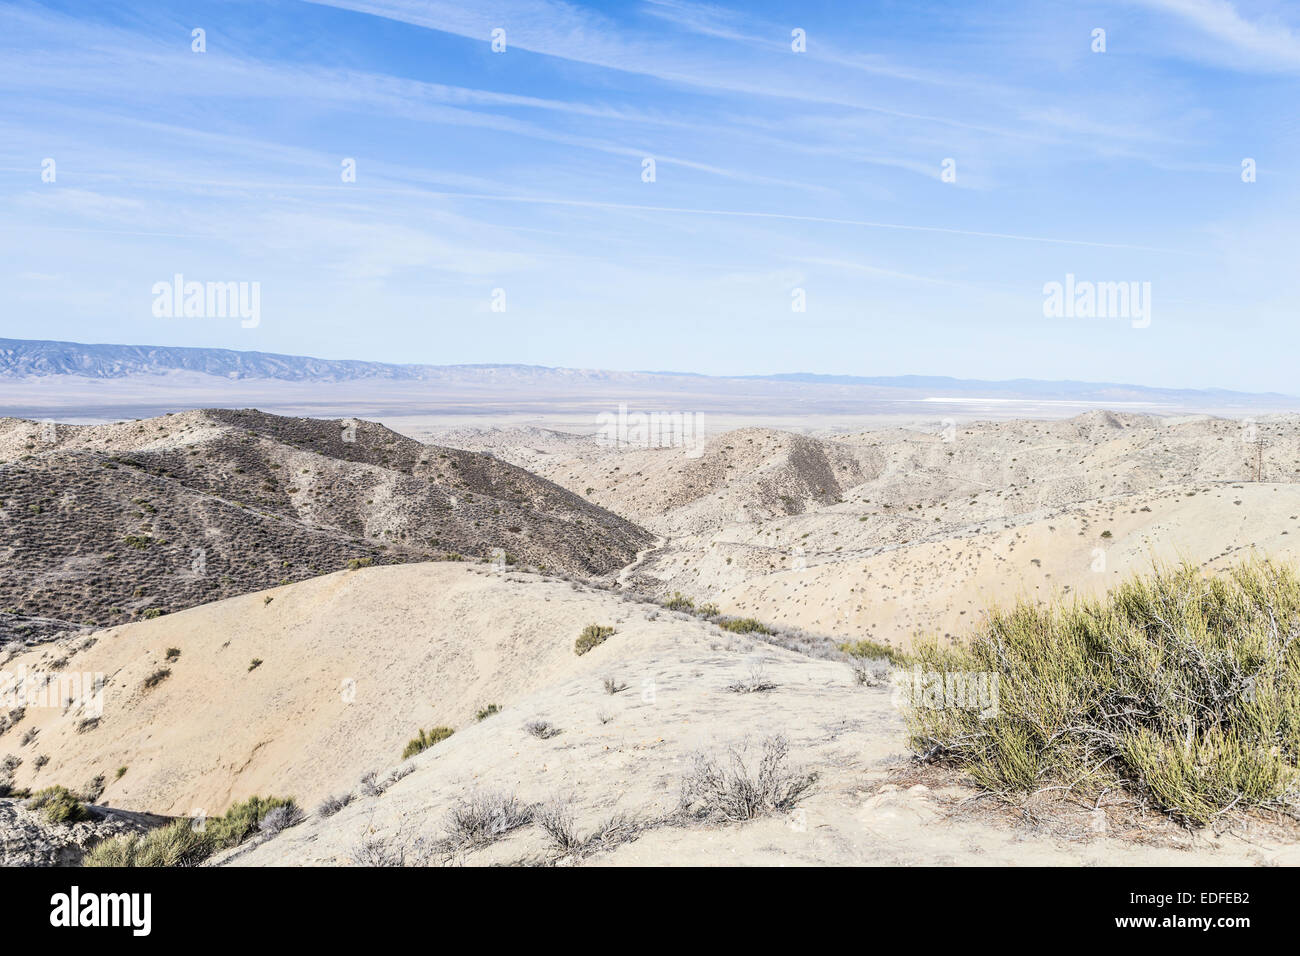 Scenic view of the The Carrizo Plain from the Temblor Range. Stock Photo